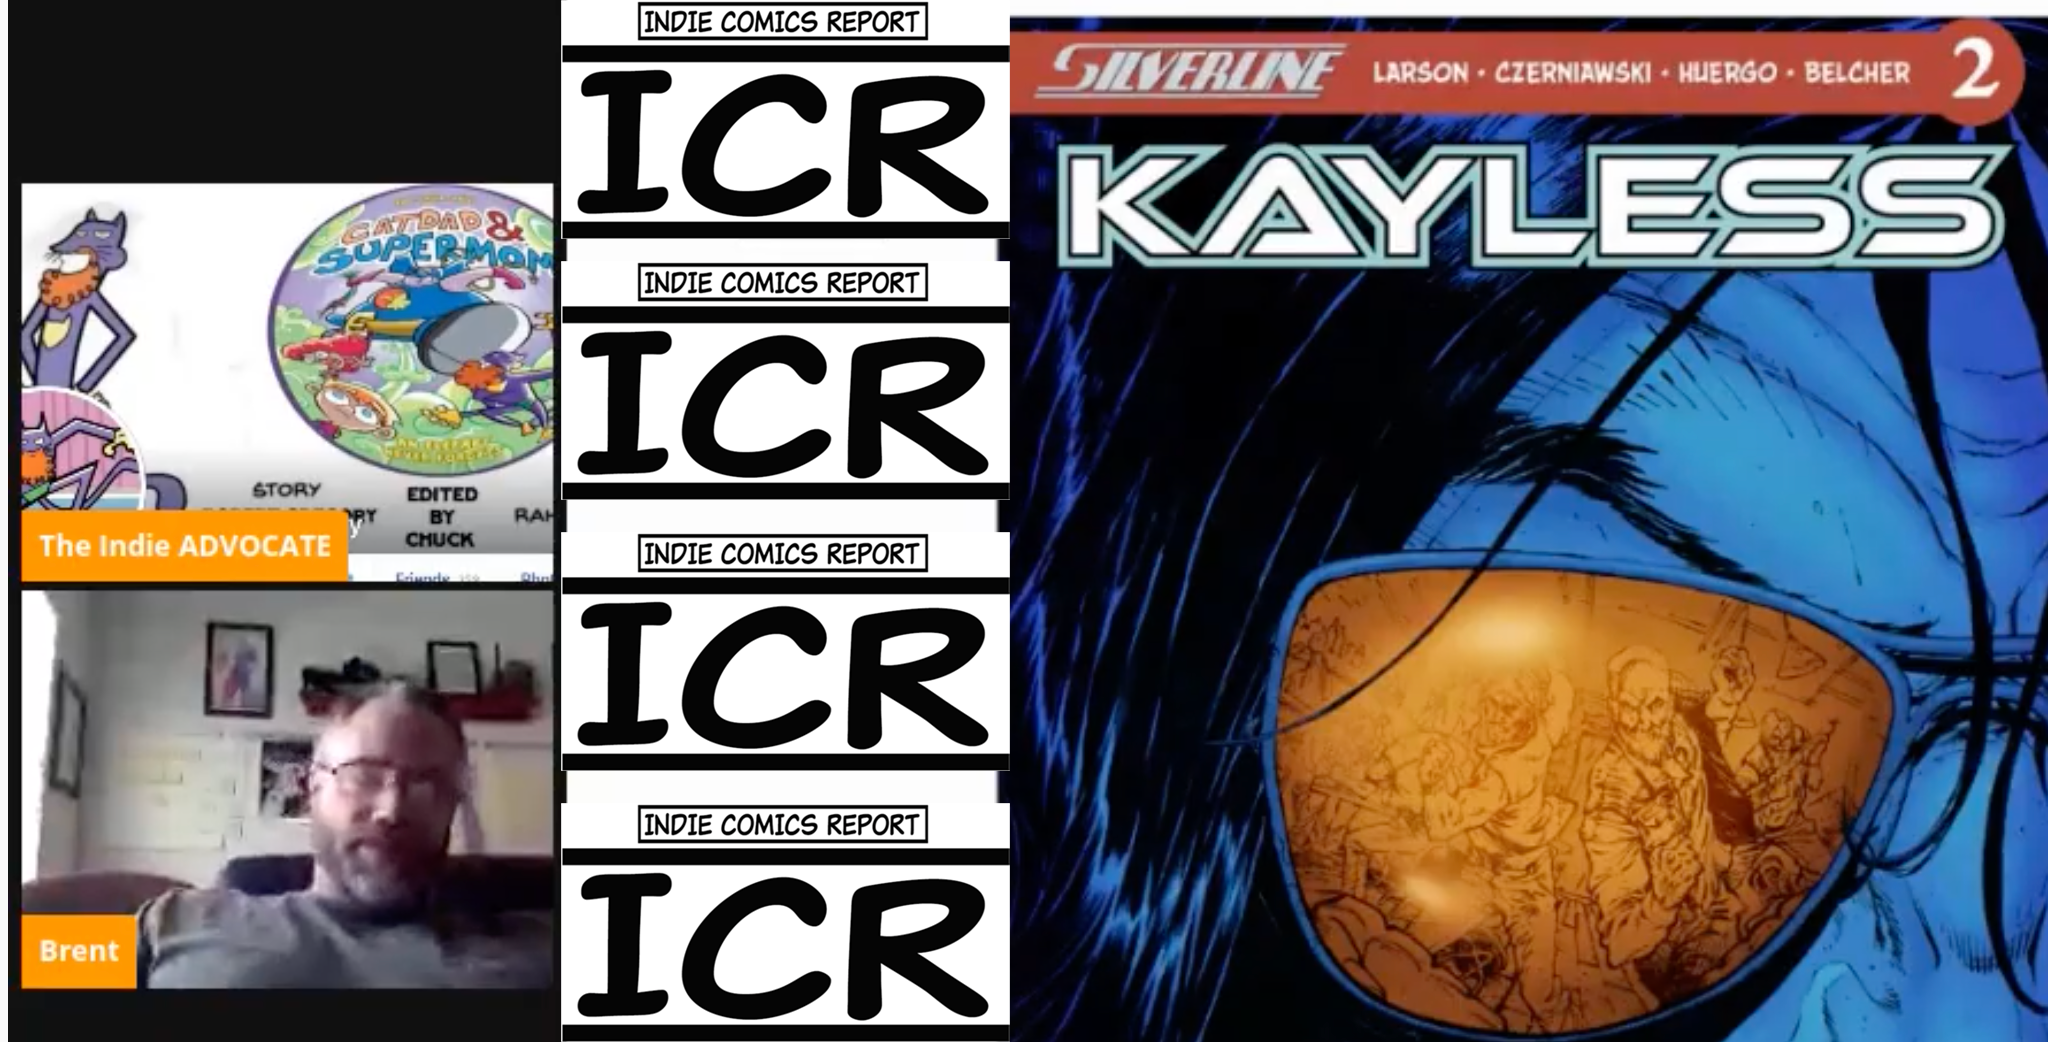 This is THE INDIE COMICS REPORT with KAYLESS Creator Brent Larson